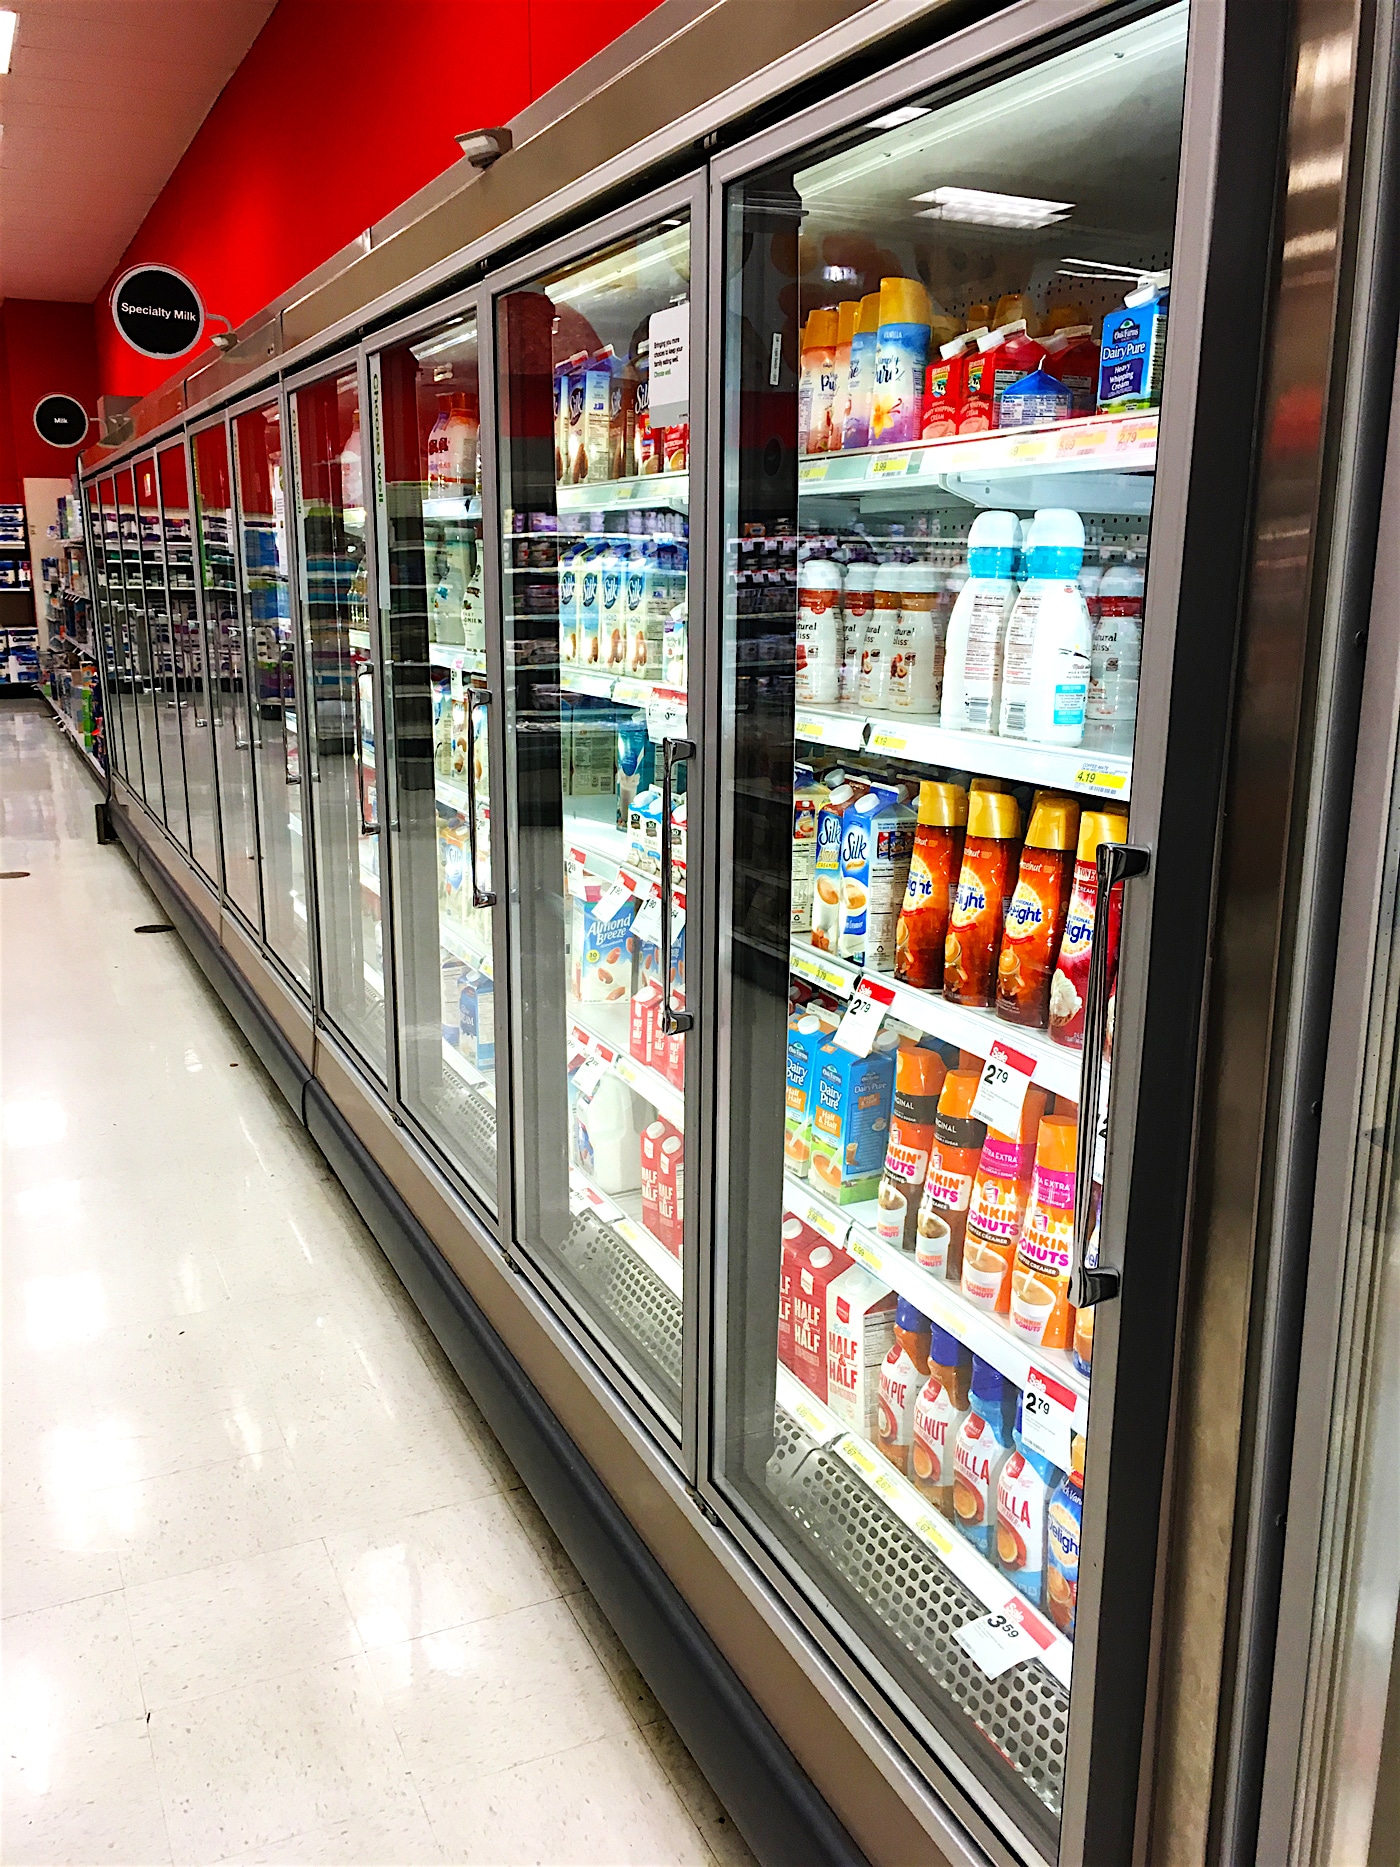 Refrigerated food cooler at Target